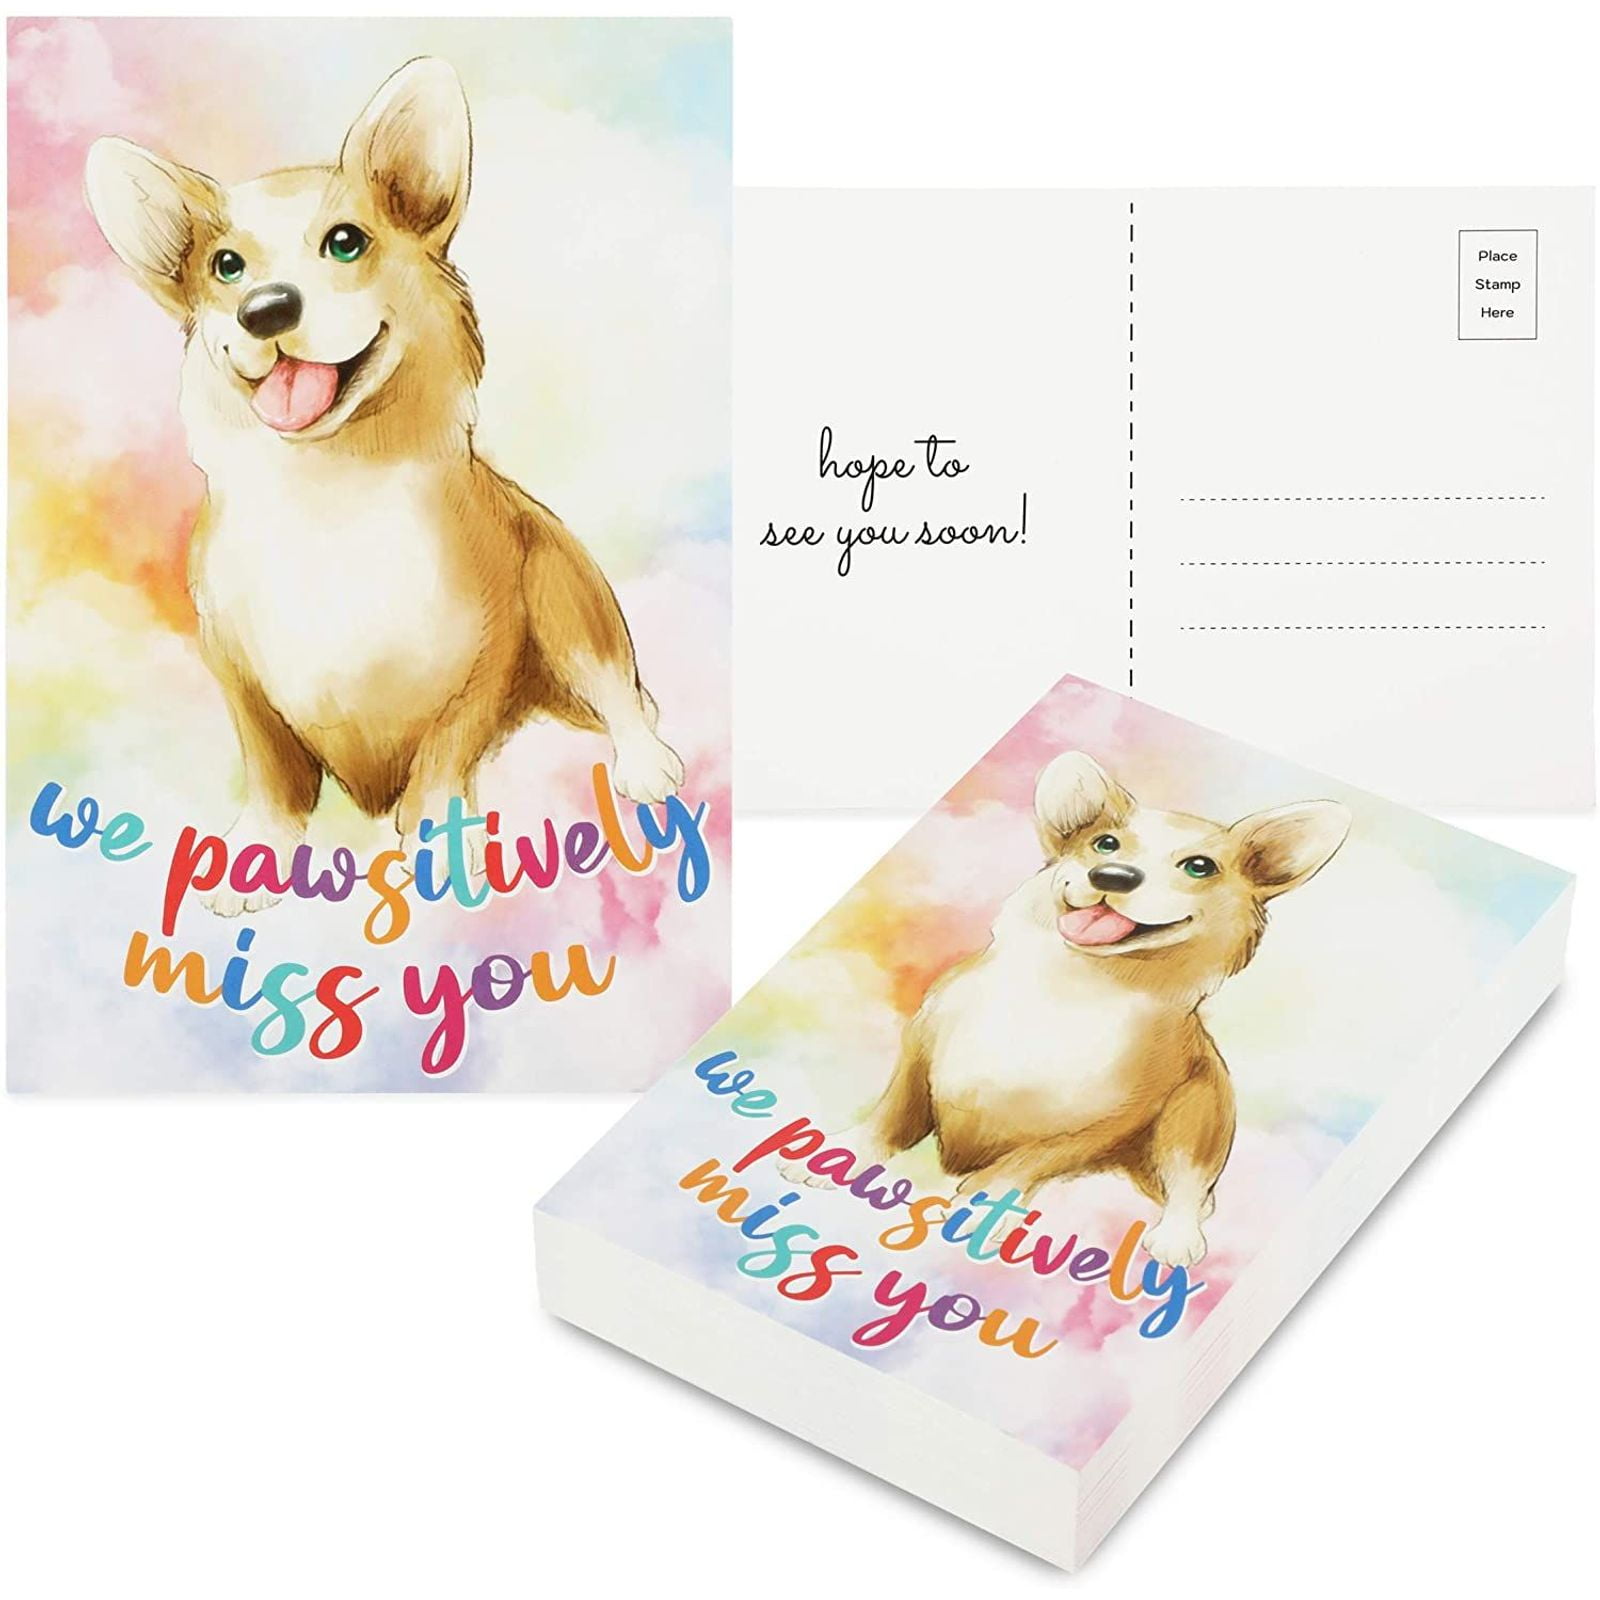 Attendance Postcard 4 x 6 In, 48 Pack We Pawsitively Miss You Postcards